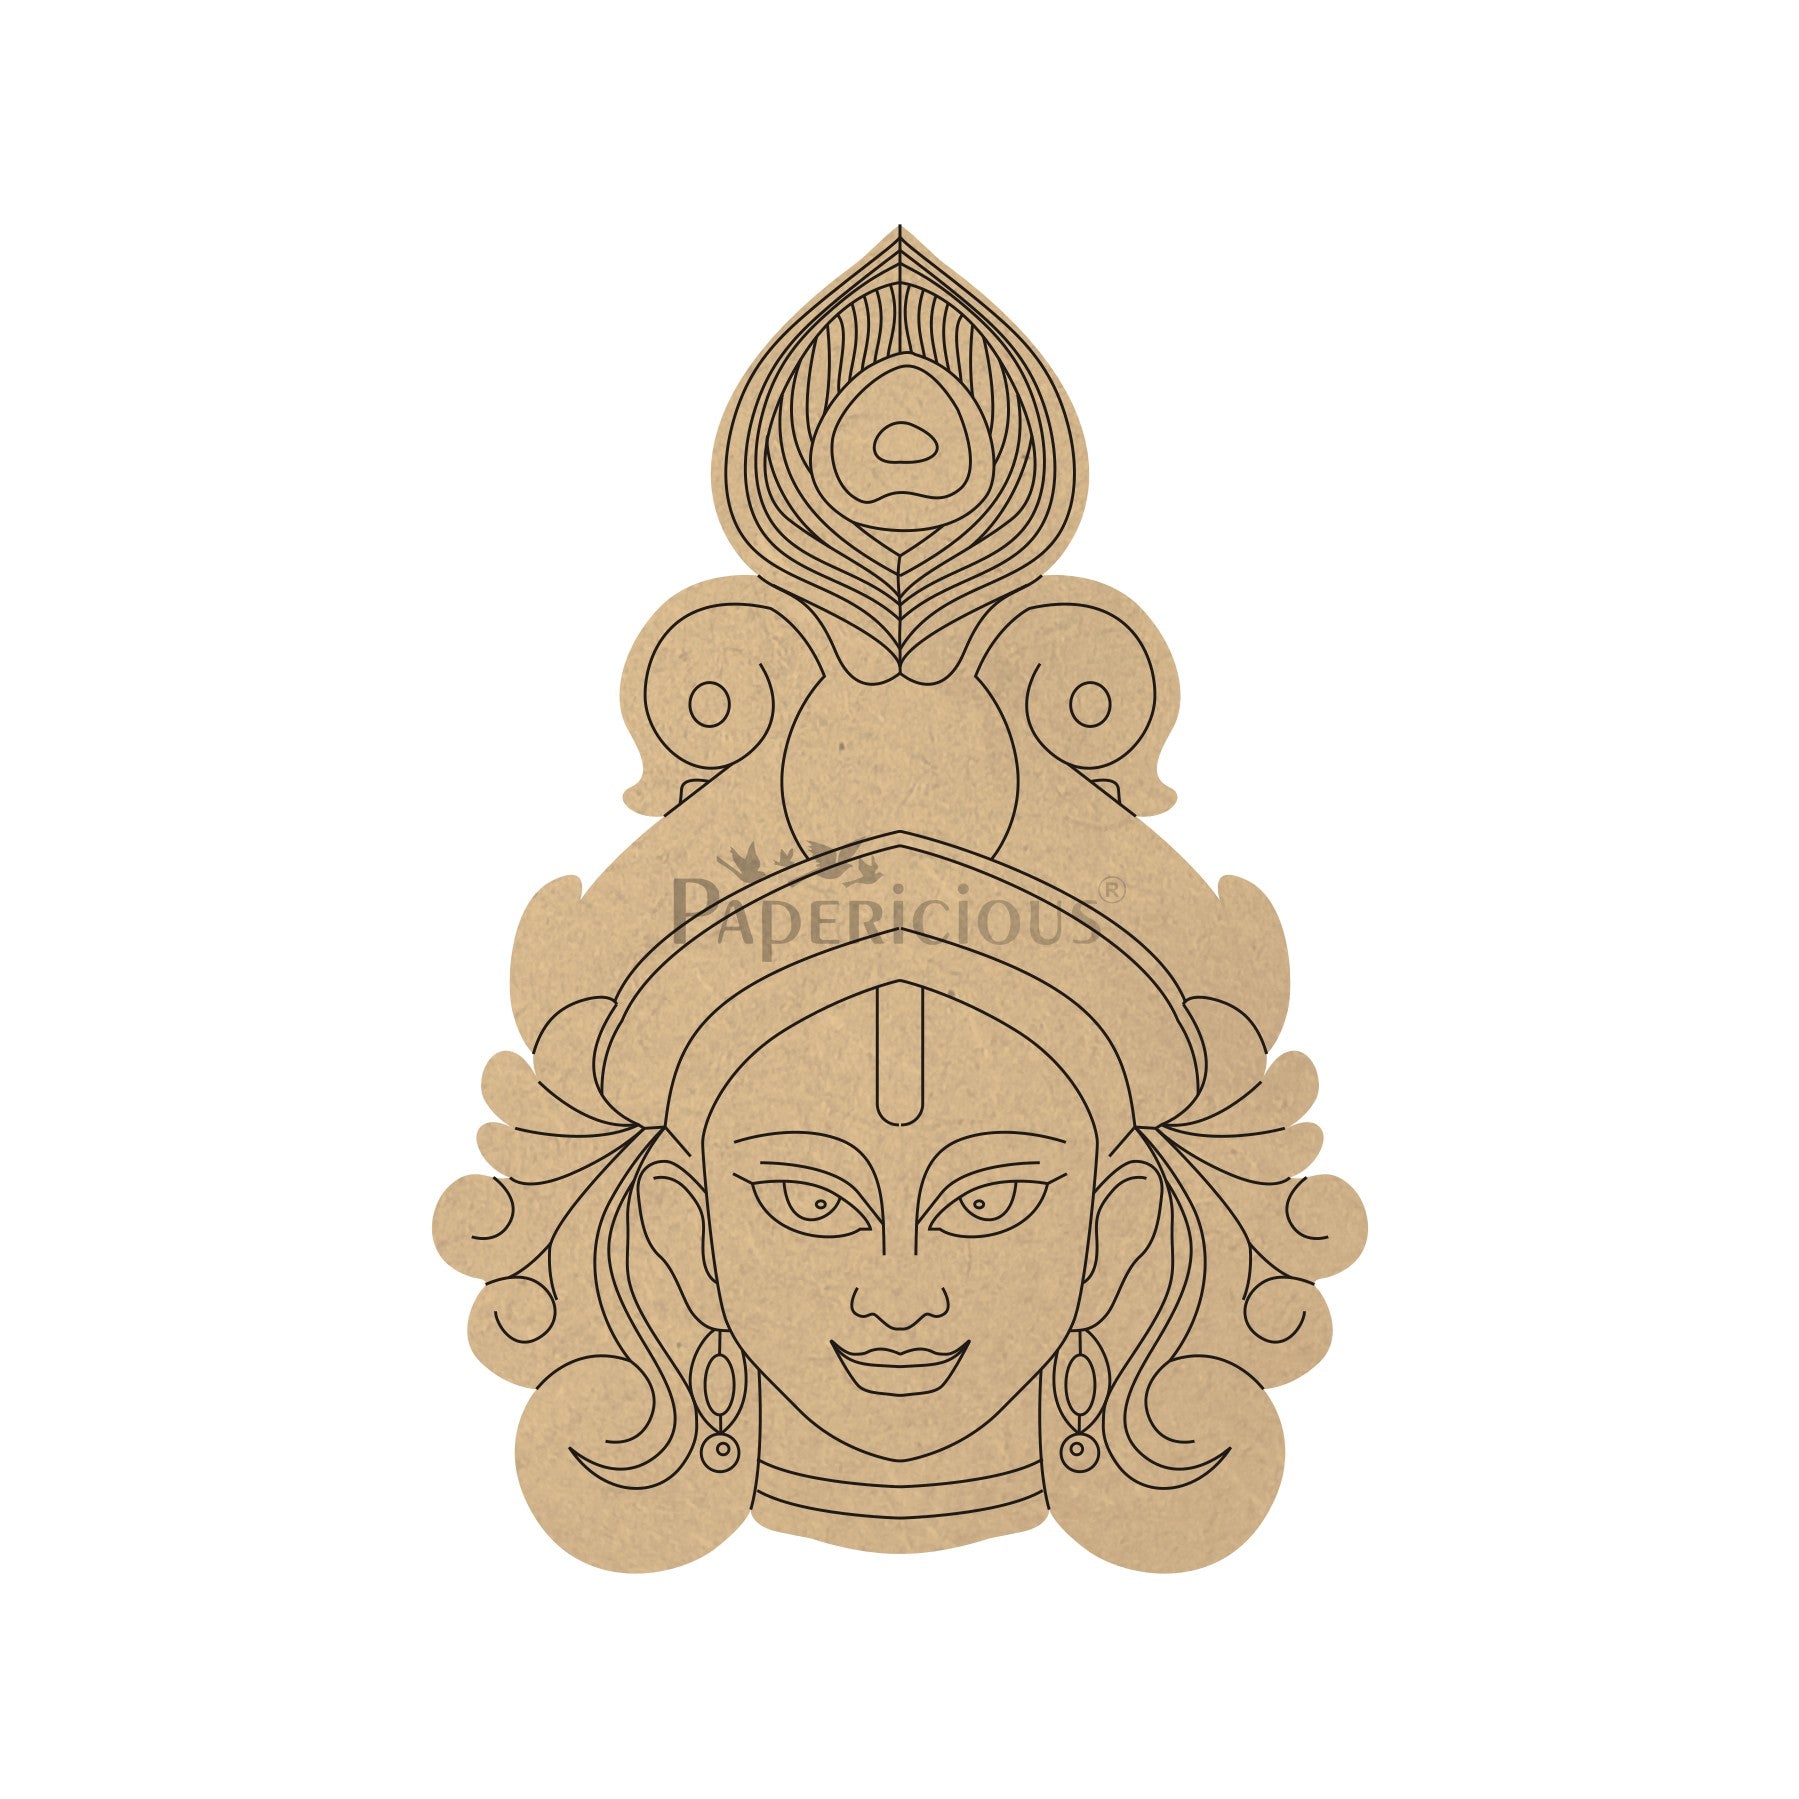 PAPERICIOUS 4mm thick Pre Marked MDF Base Durga Maa